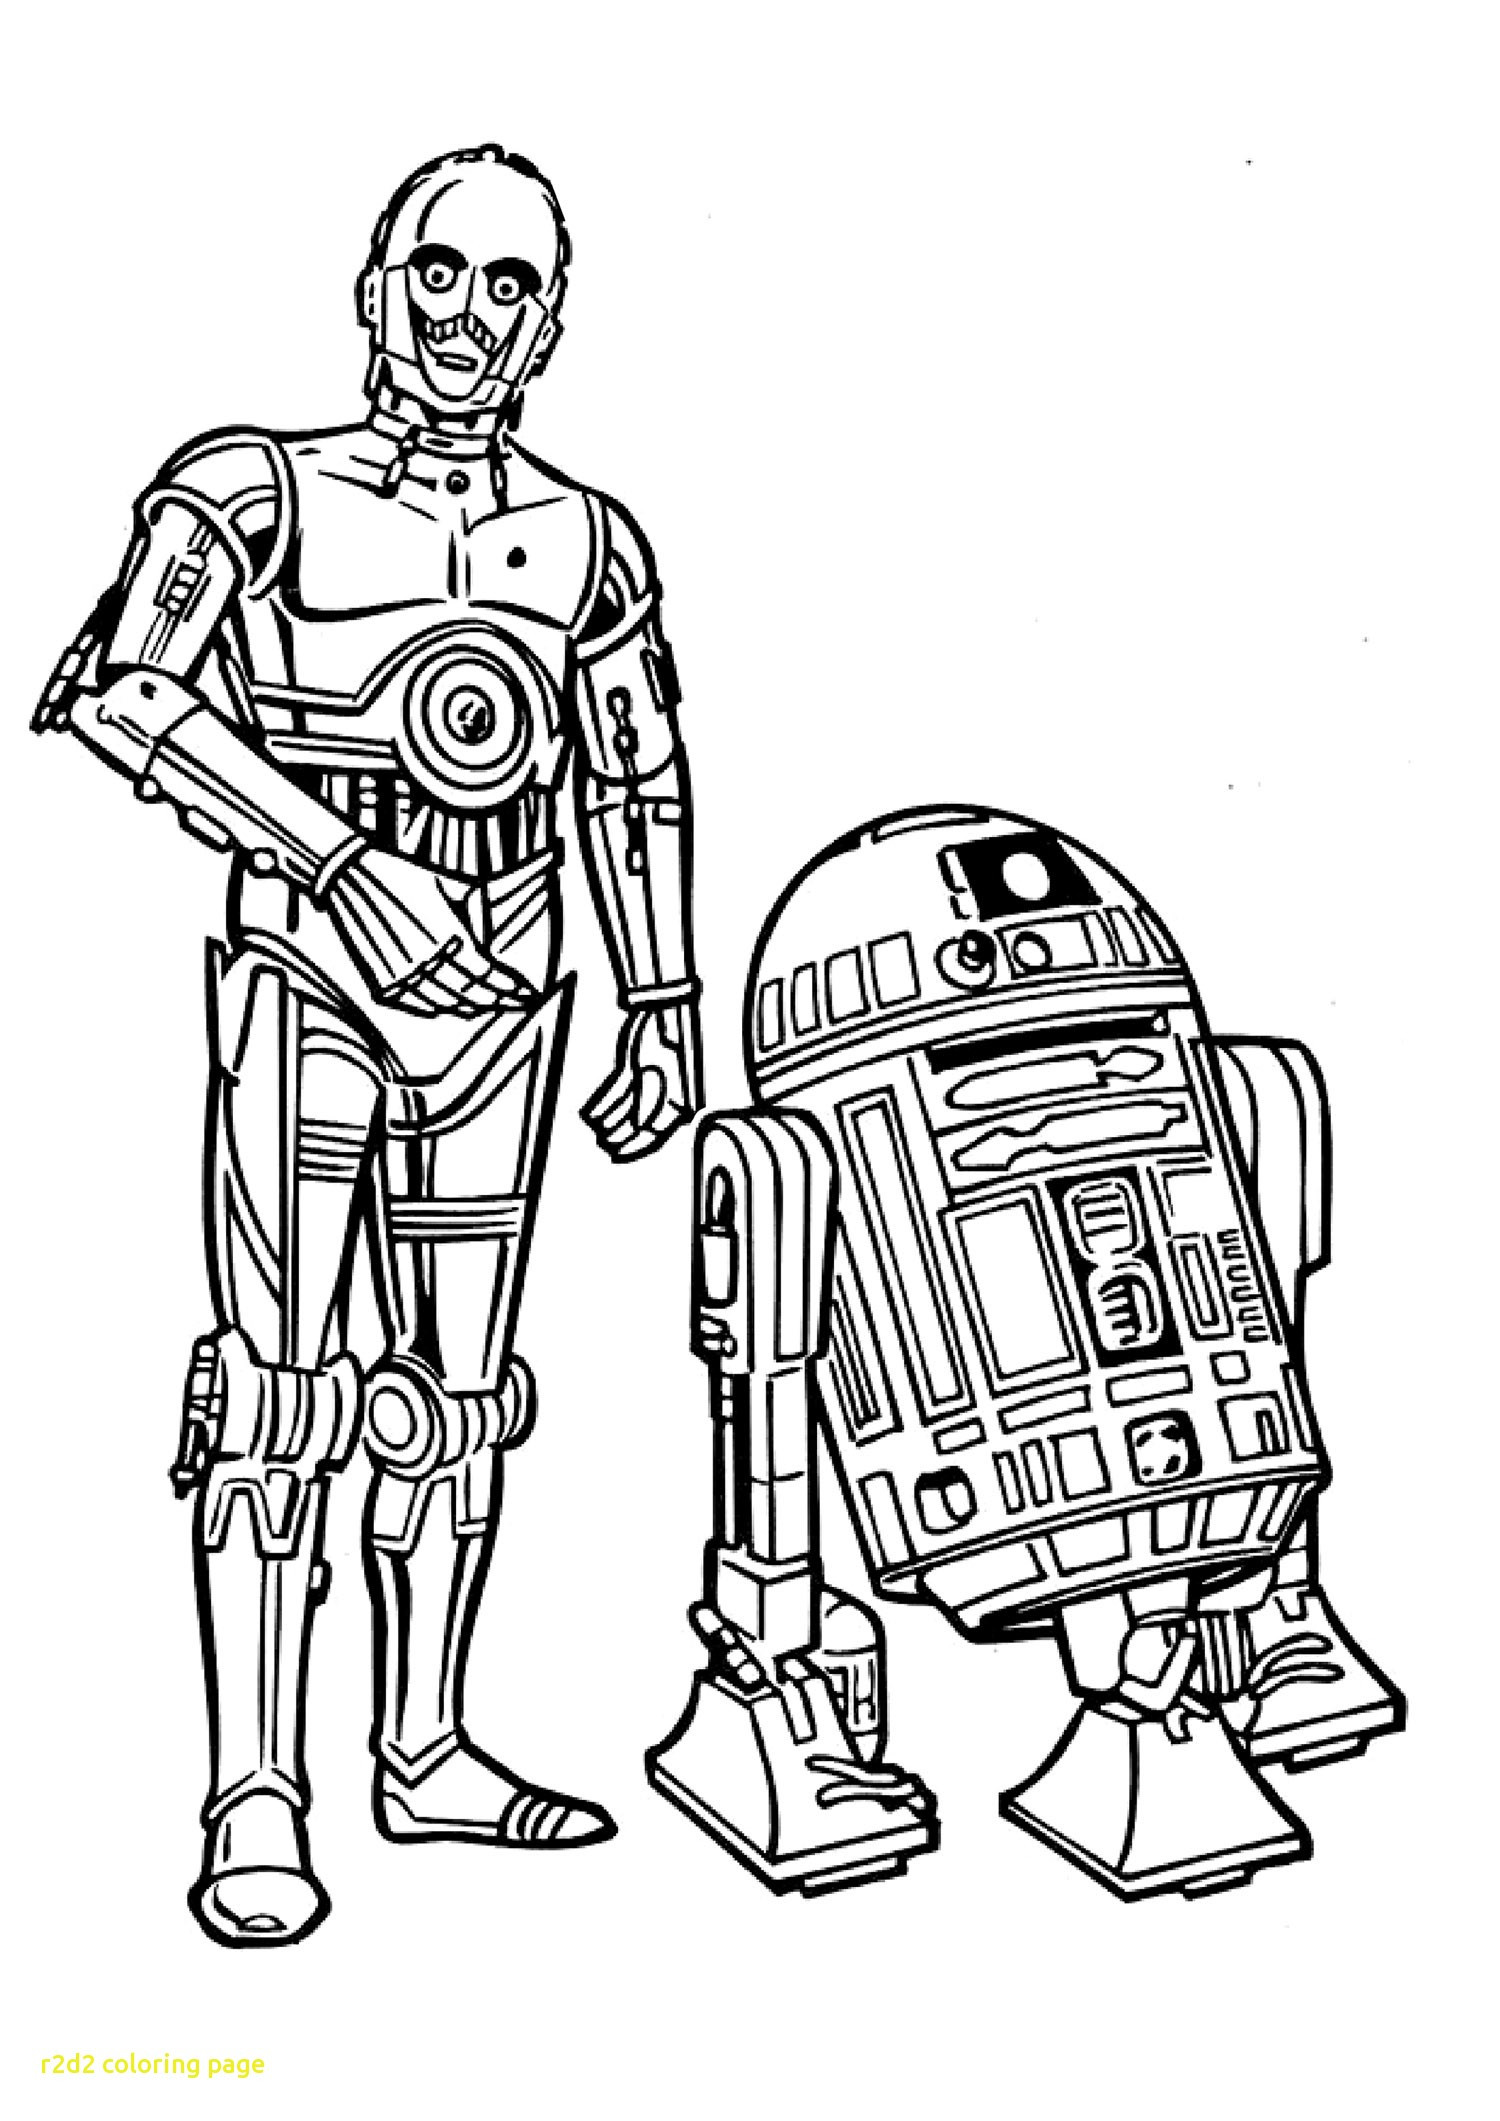 Coloring Pages : R2d2 Free Coloring Pages Lego To Print C3po ...